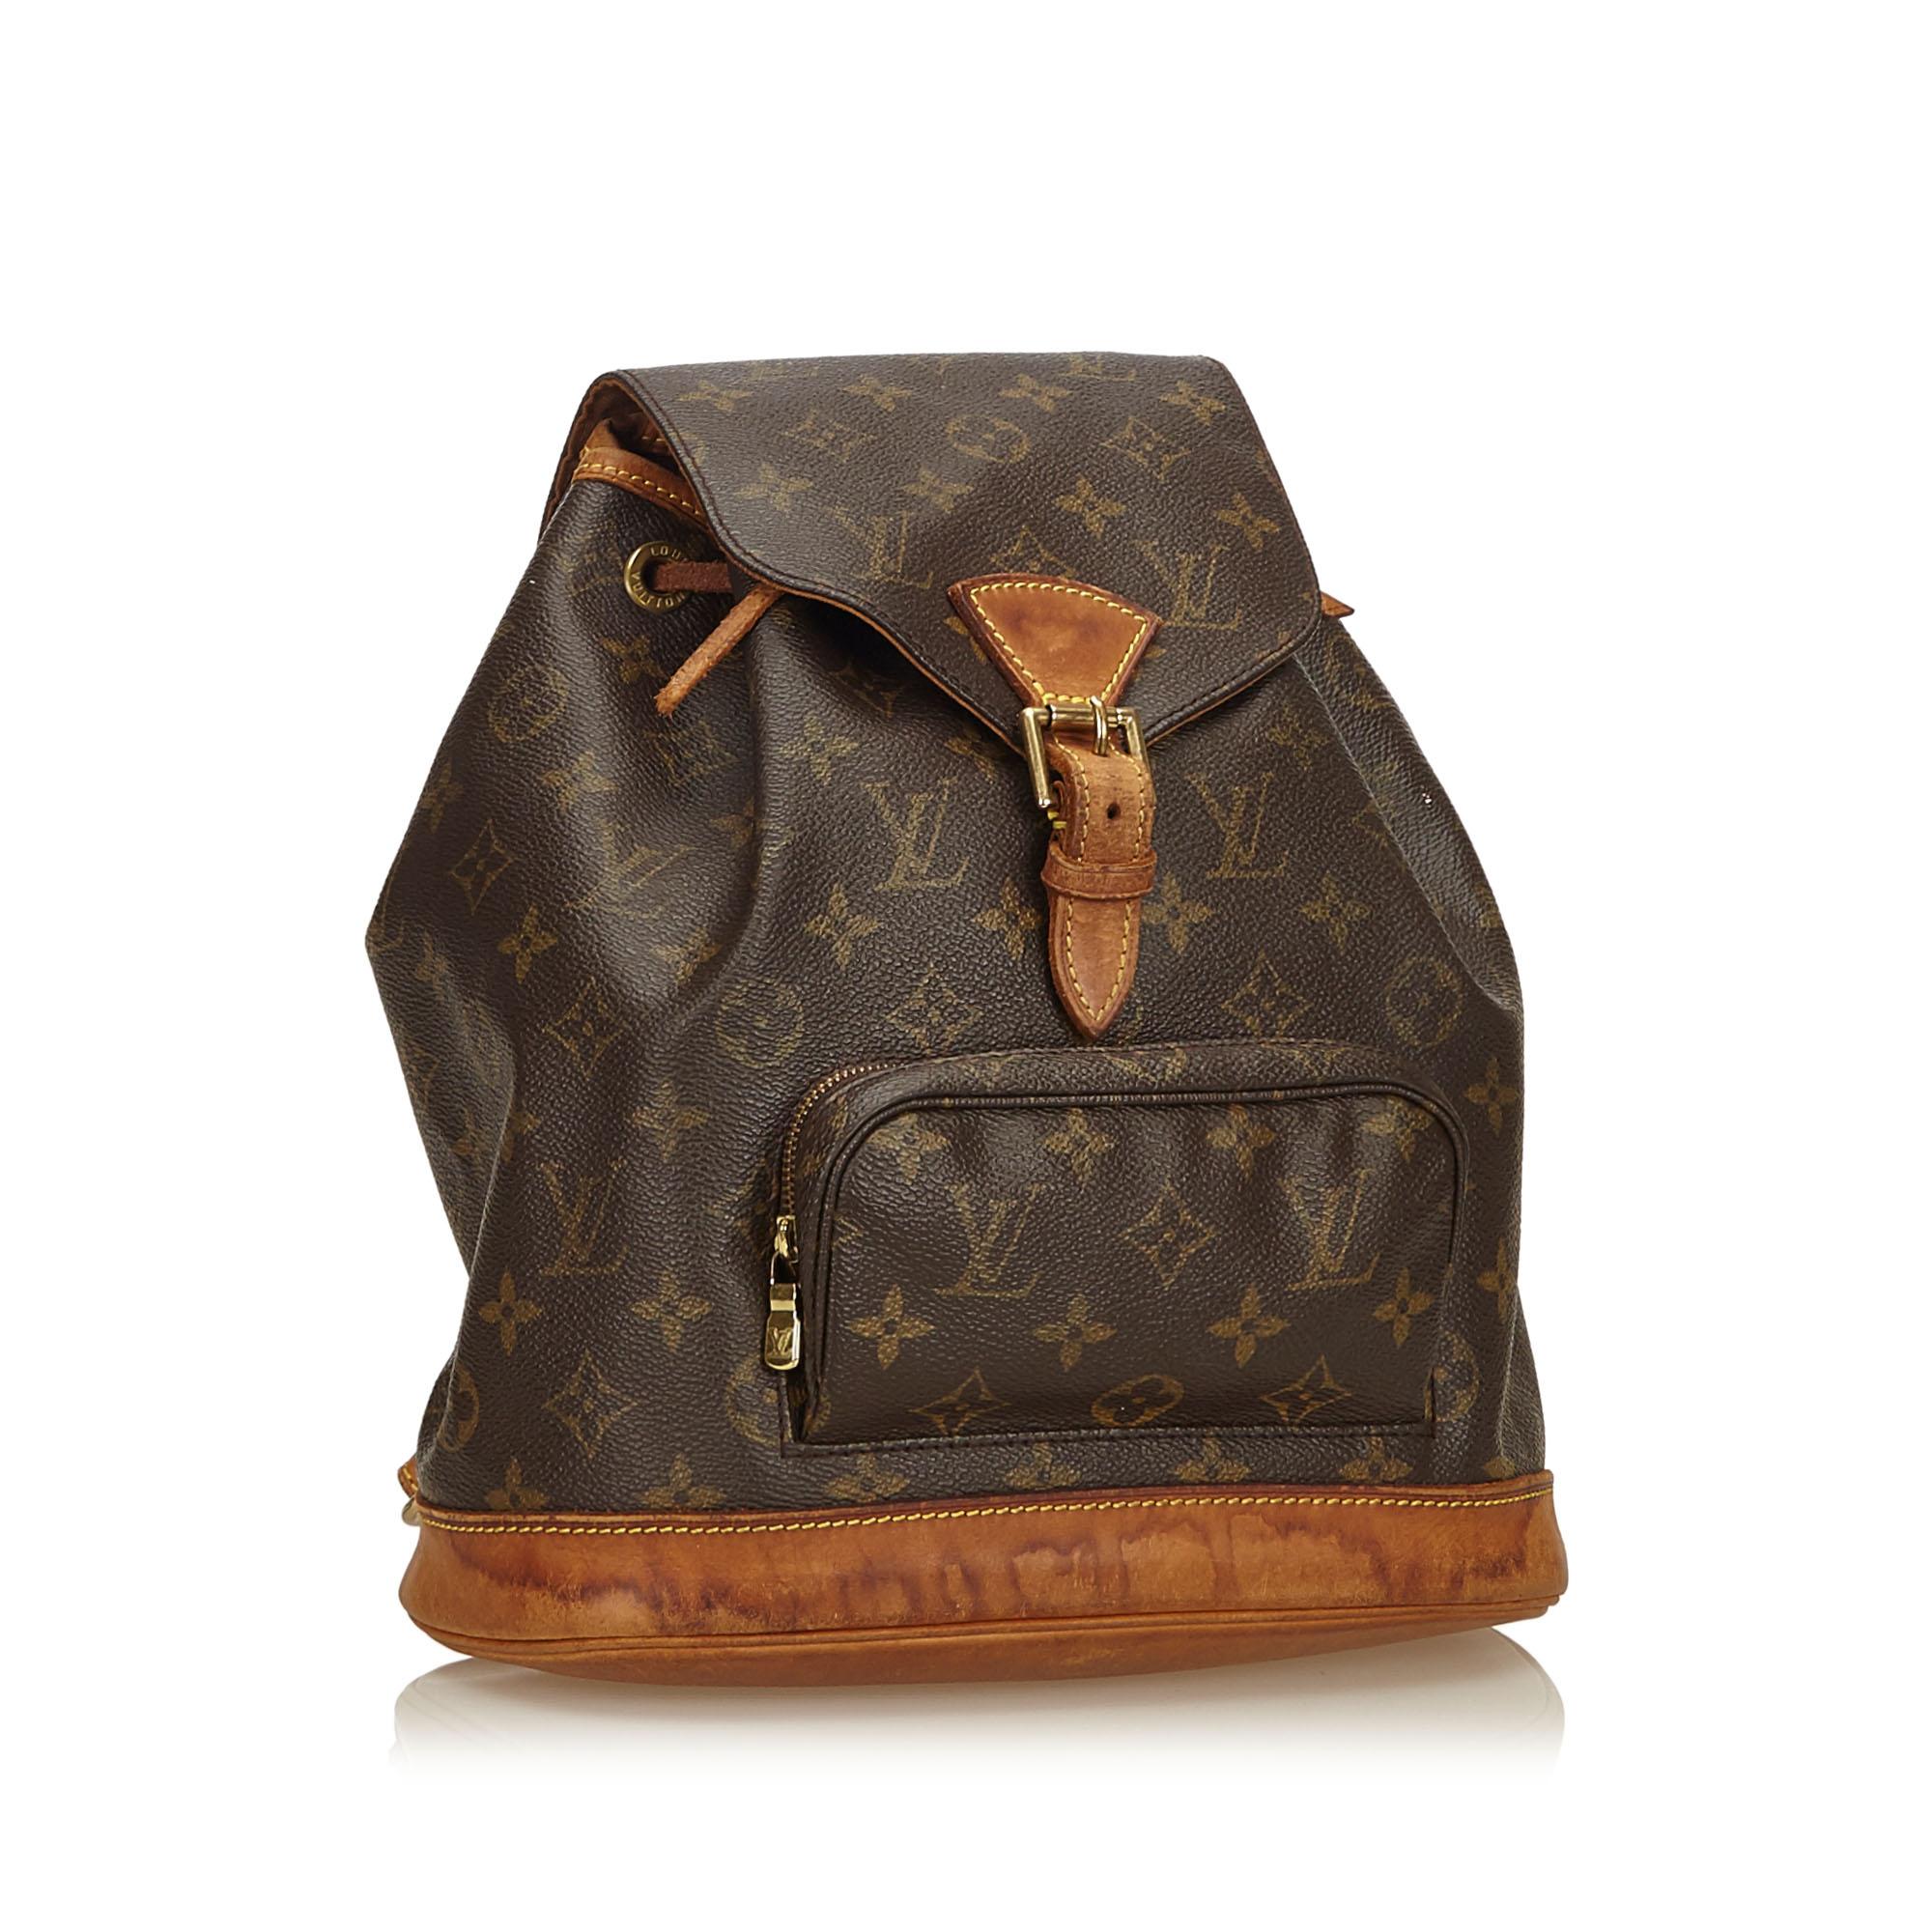 The Mini Montsouris features a monogram canvas body, a front zip pocket, a front flap with a belt buckle detail, and a top drawstring closure.

It carries a B condition rating.

Dimensions: 
Length 24.00 cm
Width 21.00 cm
Depth 10.00 cm

Inclusions: